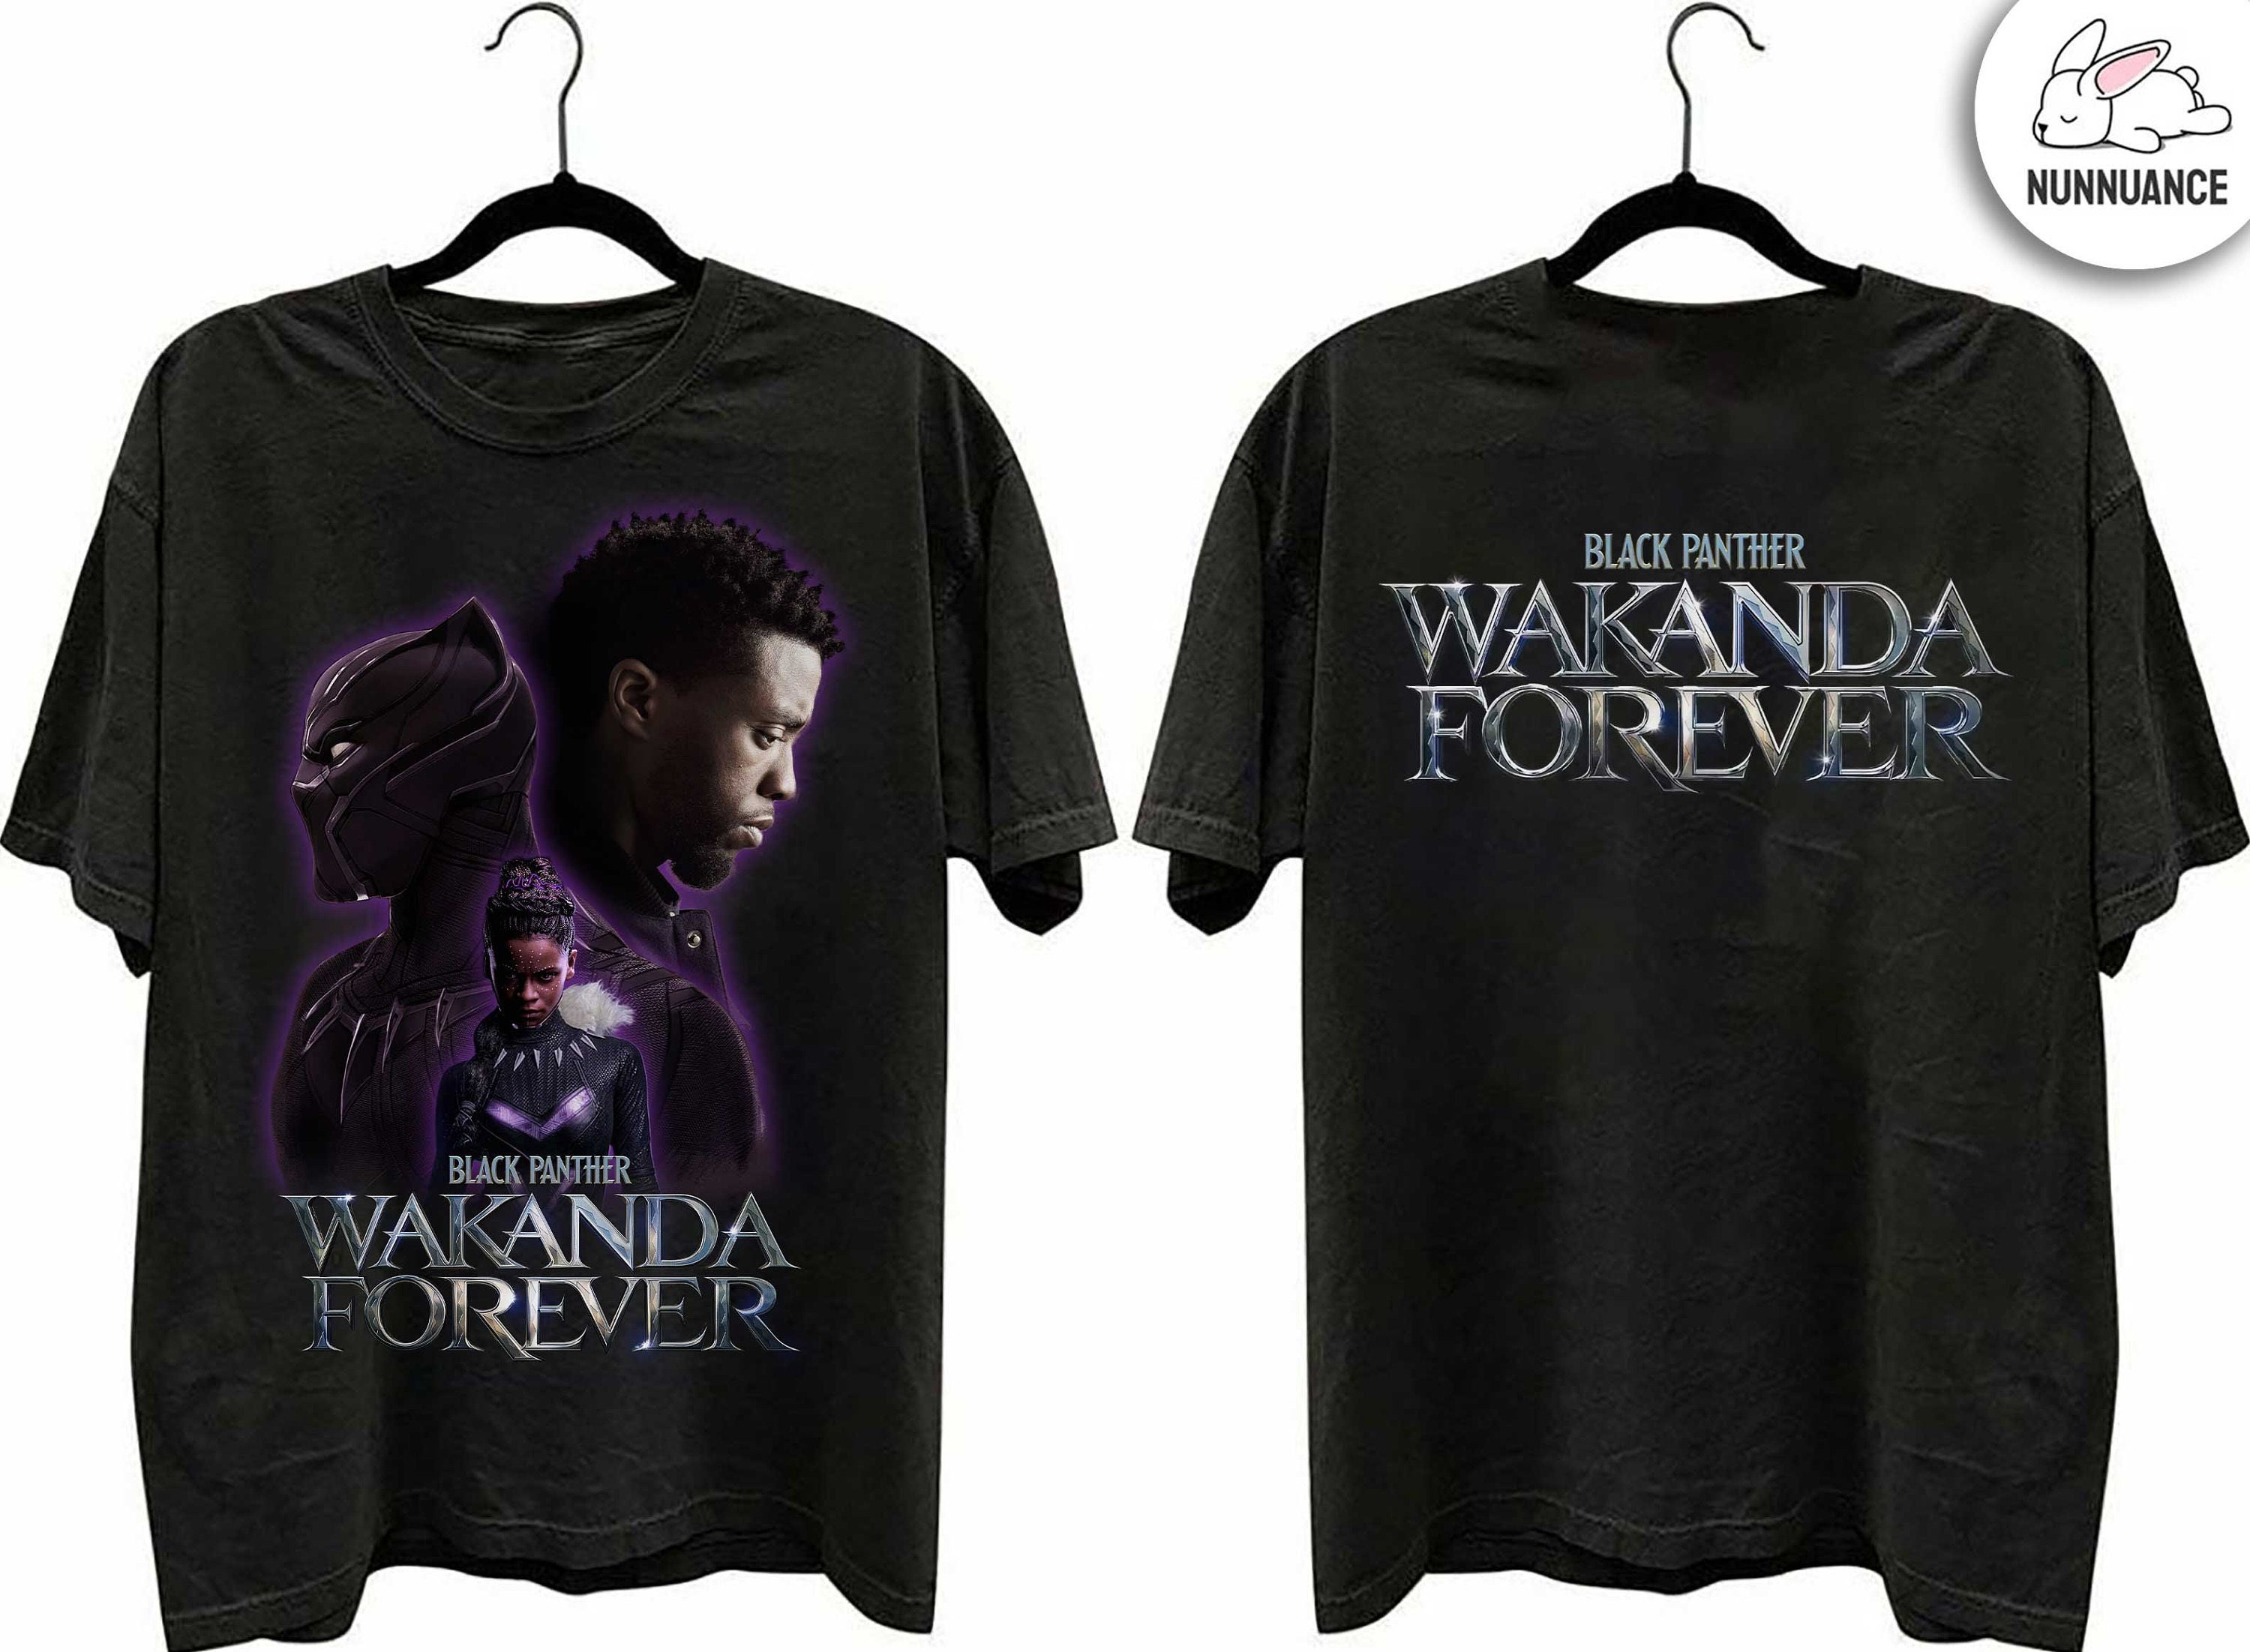 Discover Black Panther Double-sided Shirt, Wakanda Forever Shirt